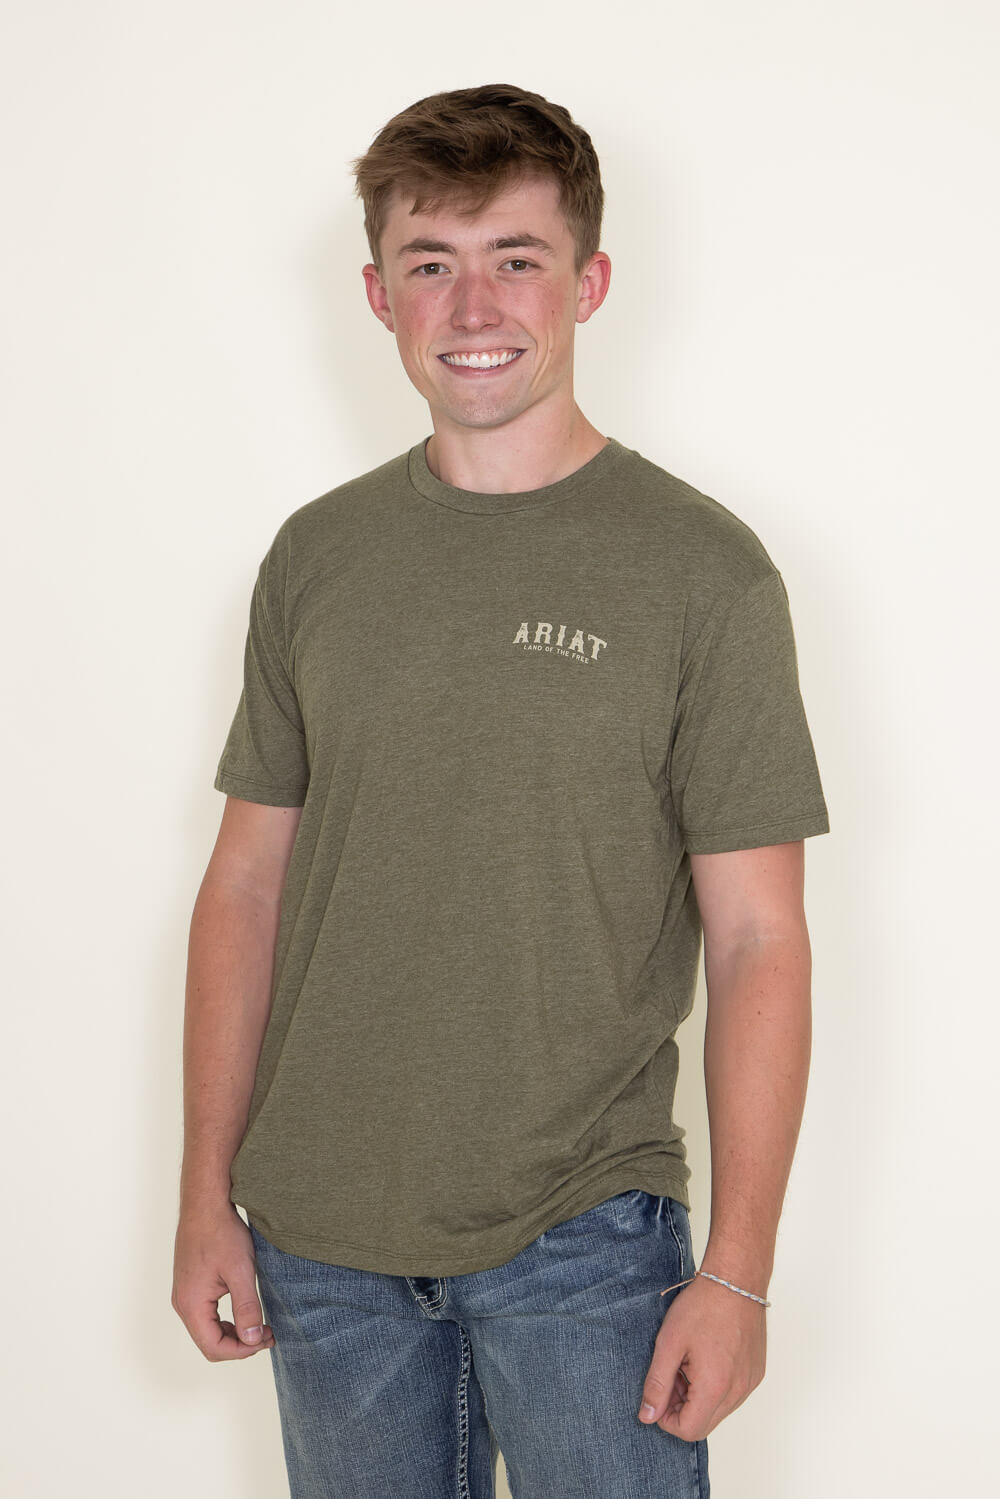 The North Face Half Dome T-Shirt for Men in Tan